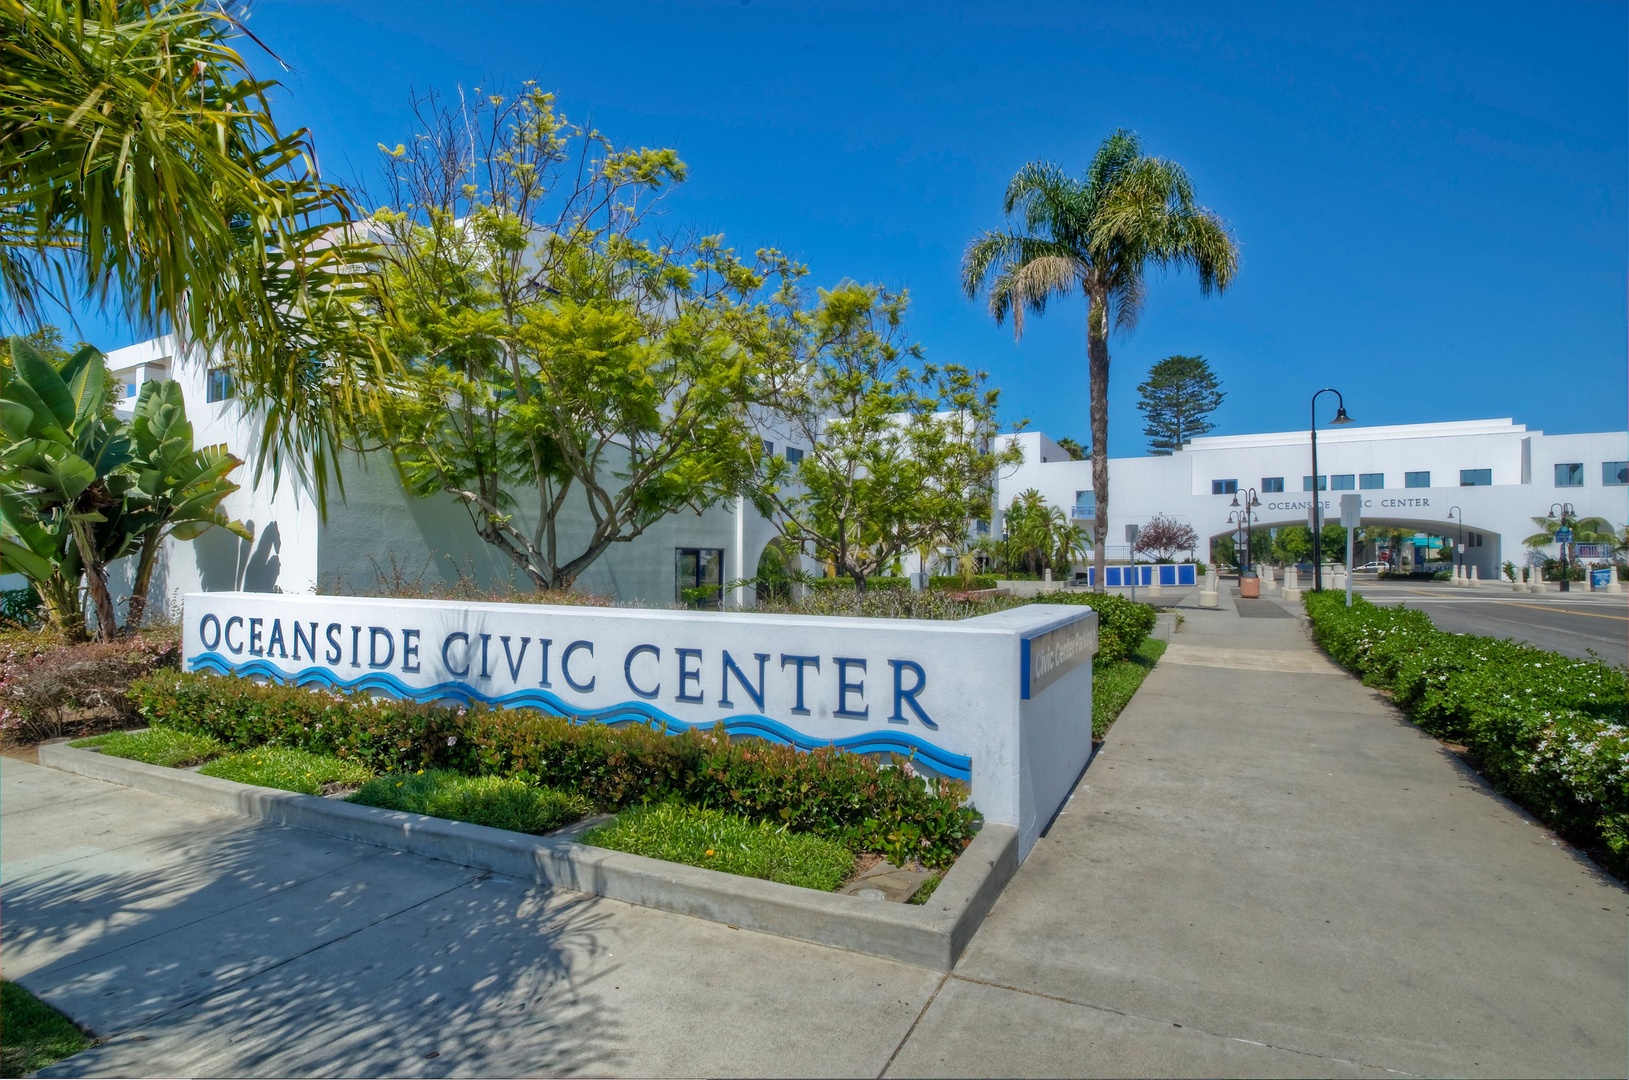 Explore local attractions such as the Oceanside Civic Center